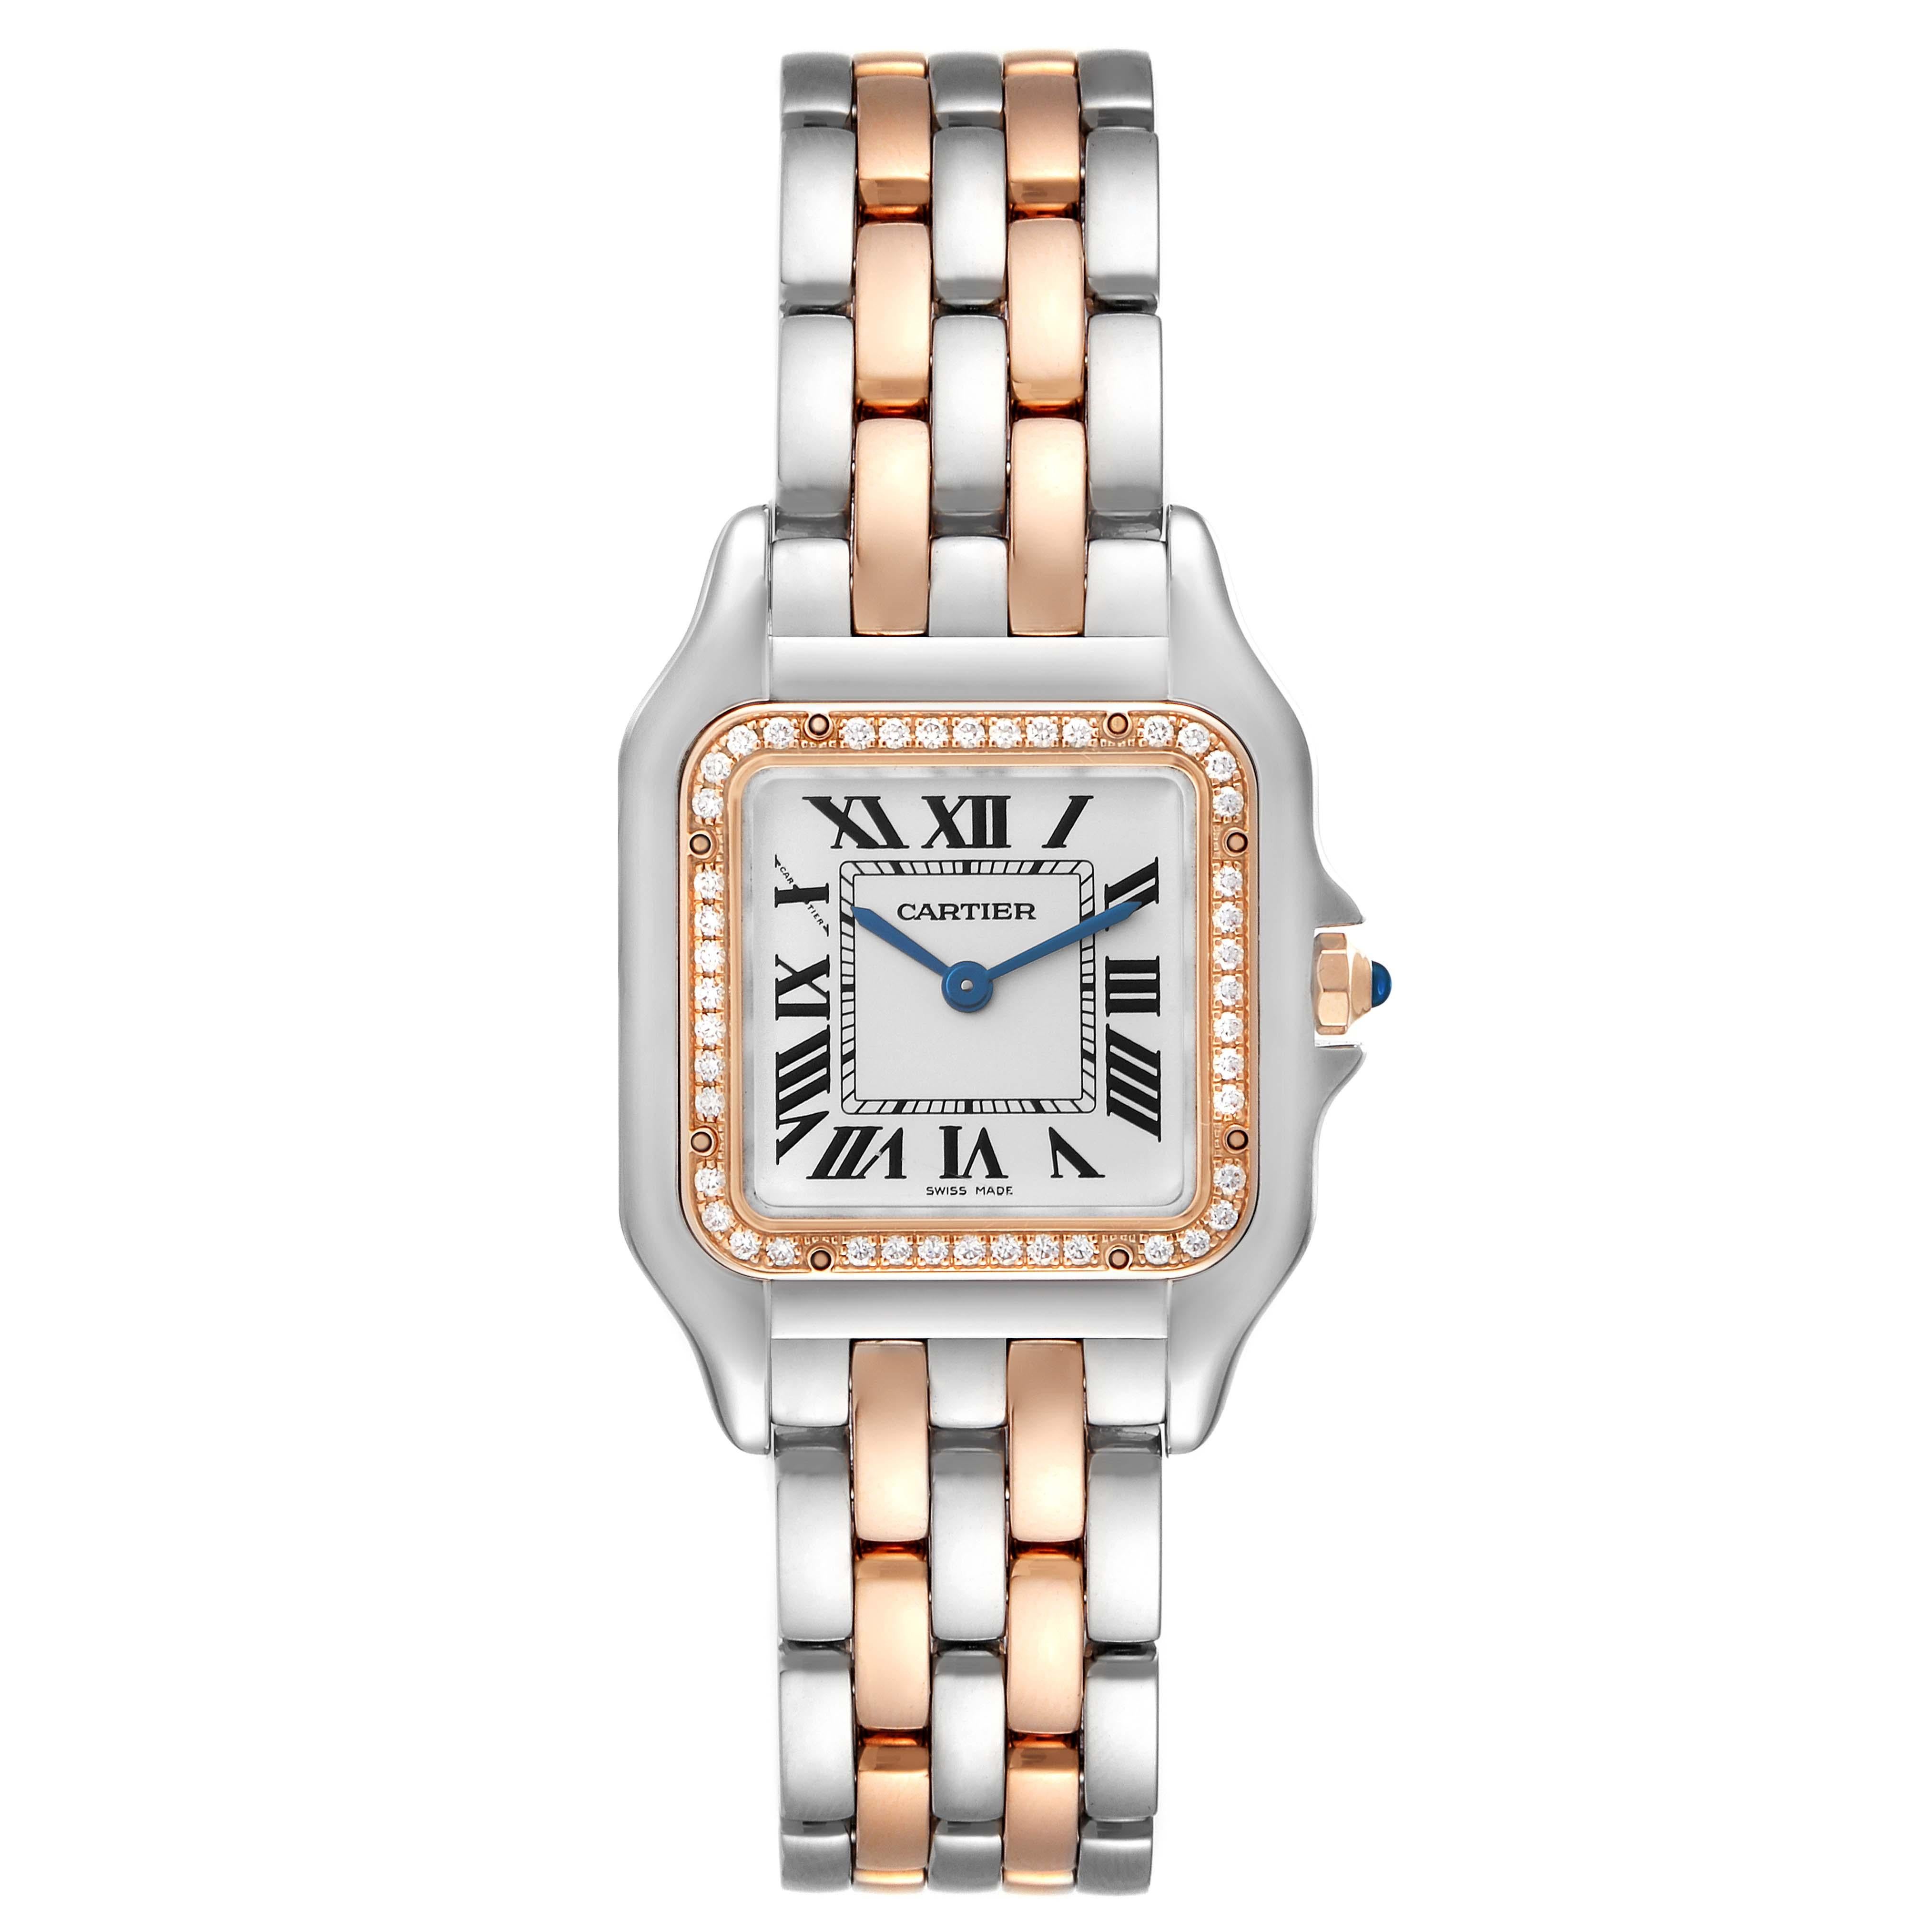 Cartier Panthere Medium Steel Rose Gold Diamond Ladies Watch W3PN0007. Quartz movement. Stainless steel and 18k rose gold case 29 mm x 37 mm. 6 mm case thickness. 18k rose gold octagonal crown set with a blue spinel cabochon. Original Cartier